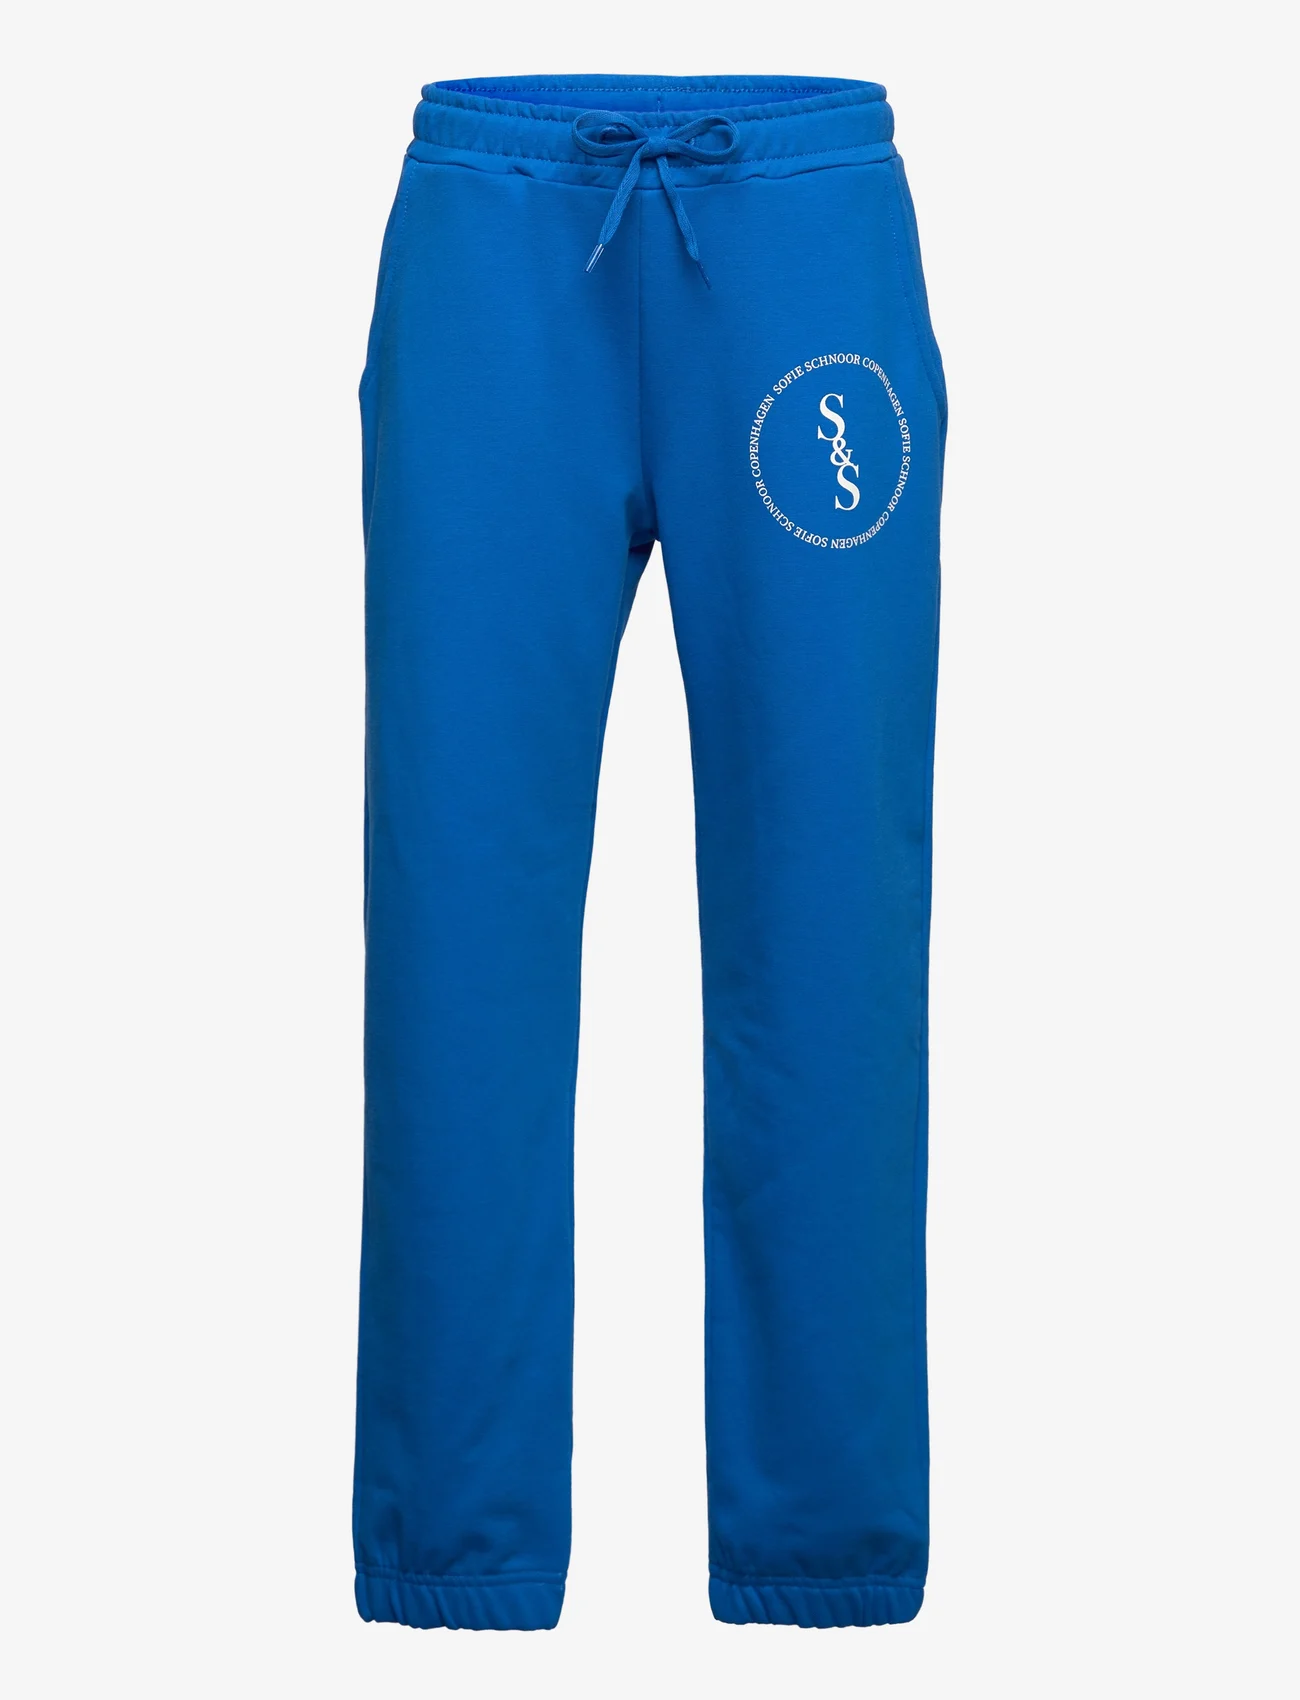 Sofie Schnoor Baby and Kids - Sweatpants - sweatpants - clear blue - 0